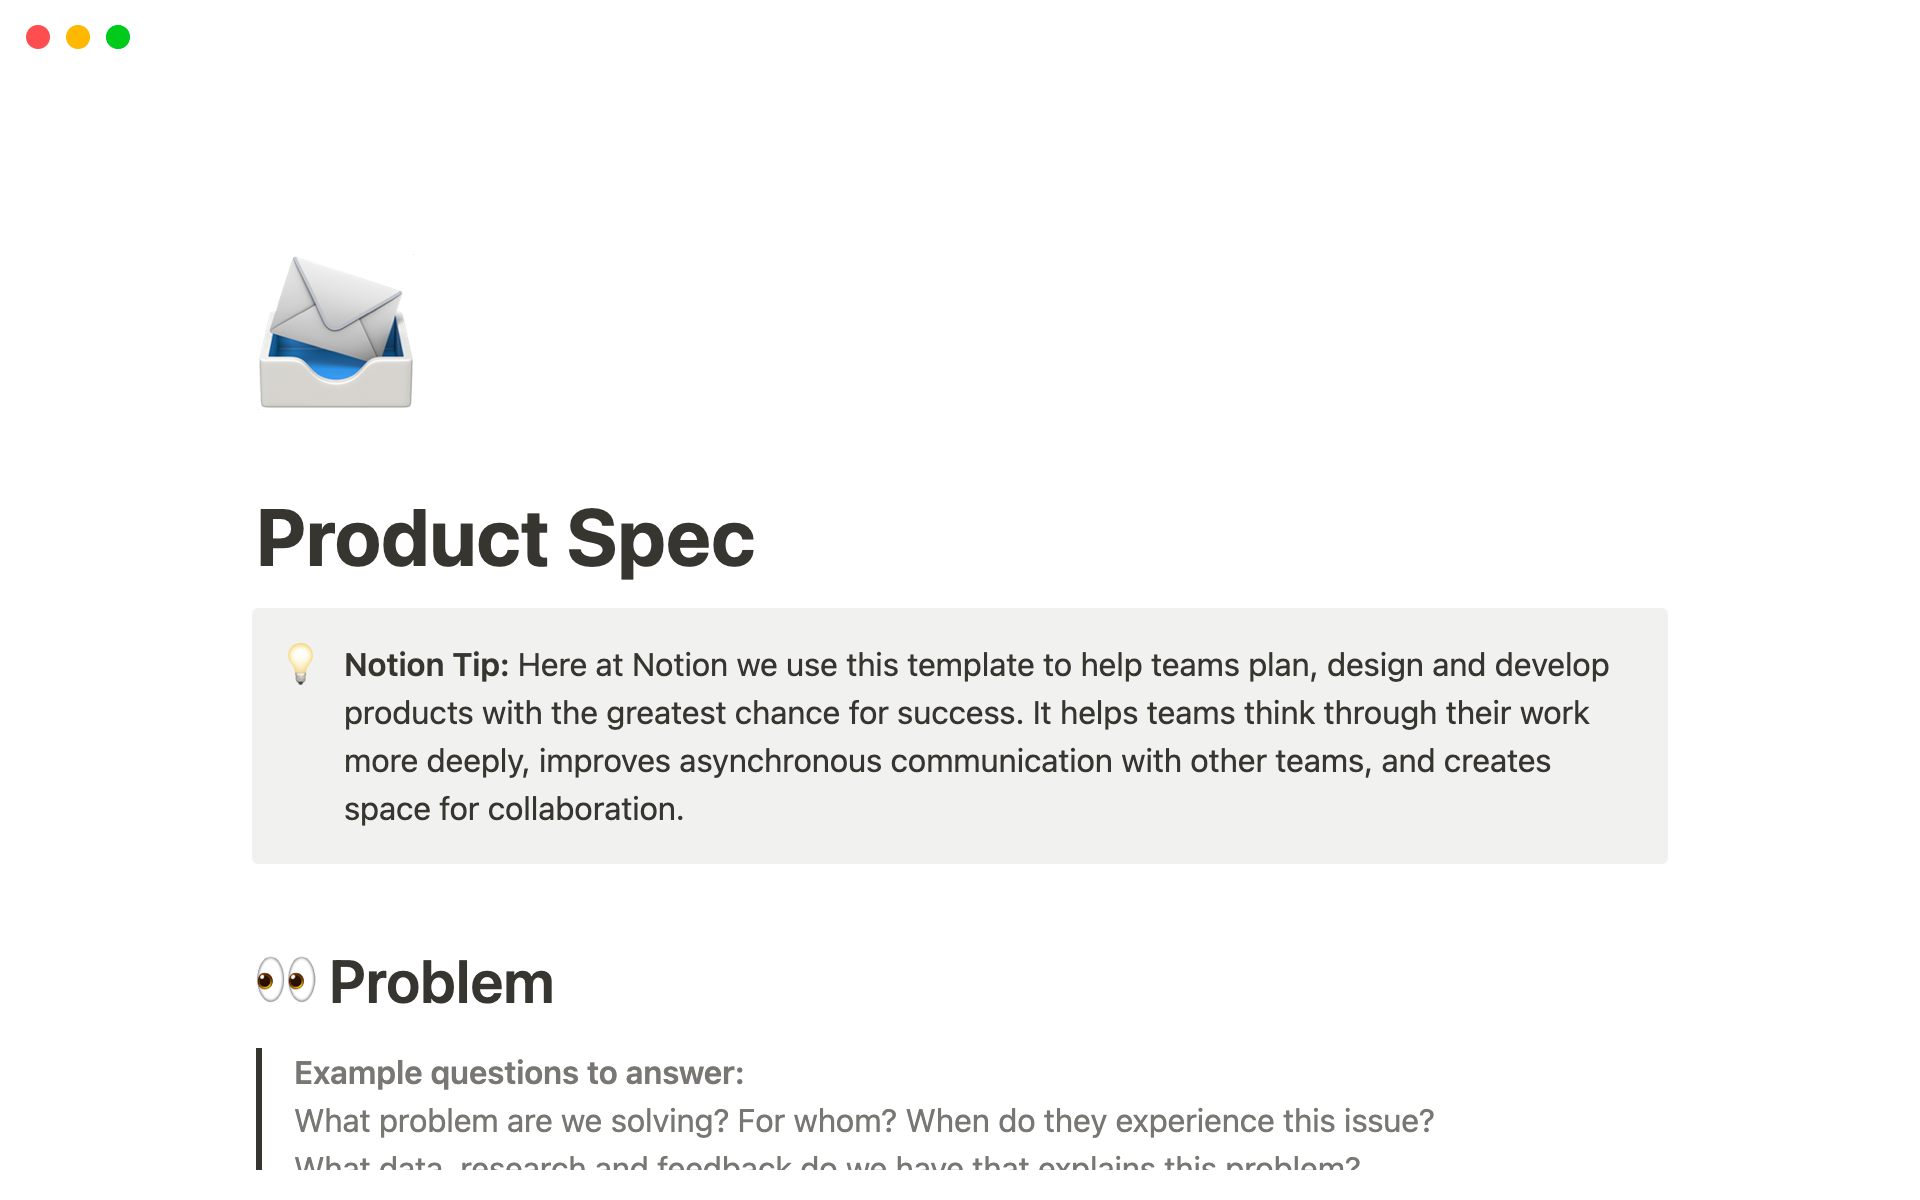 A product spec should contain all the info your team needs to build something new. Use this template as a source of truth to give context, set goals, see edge cases, and plan development steps.